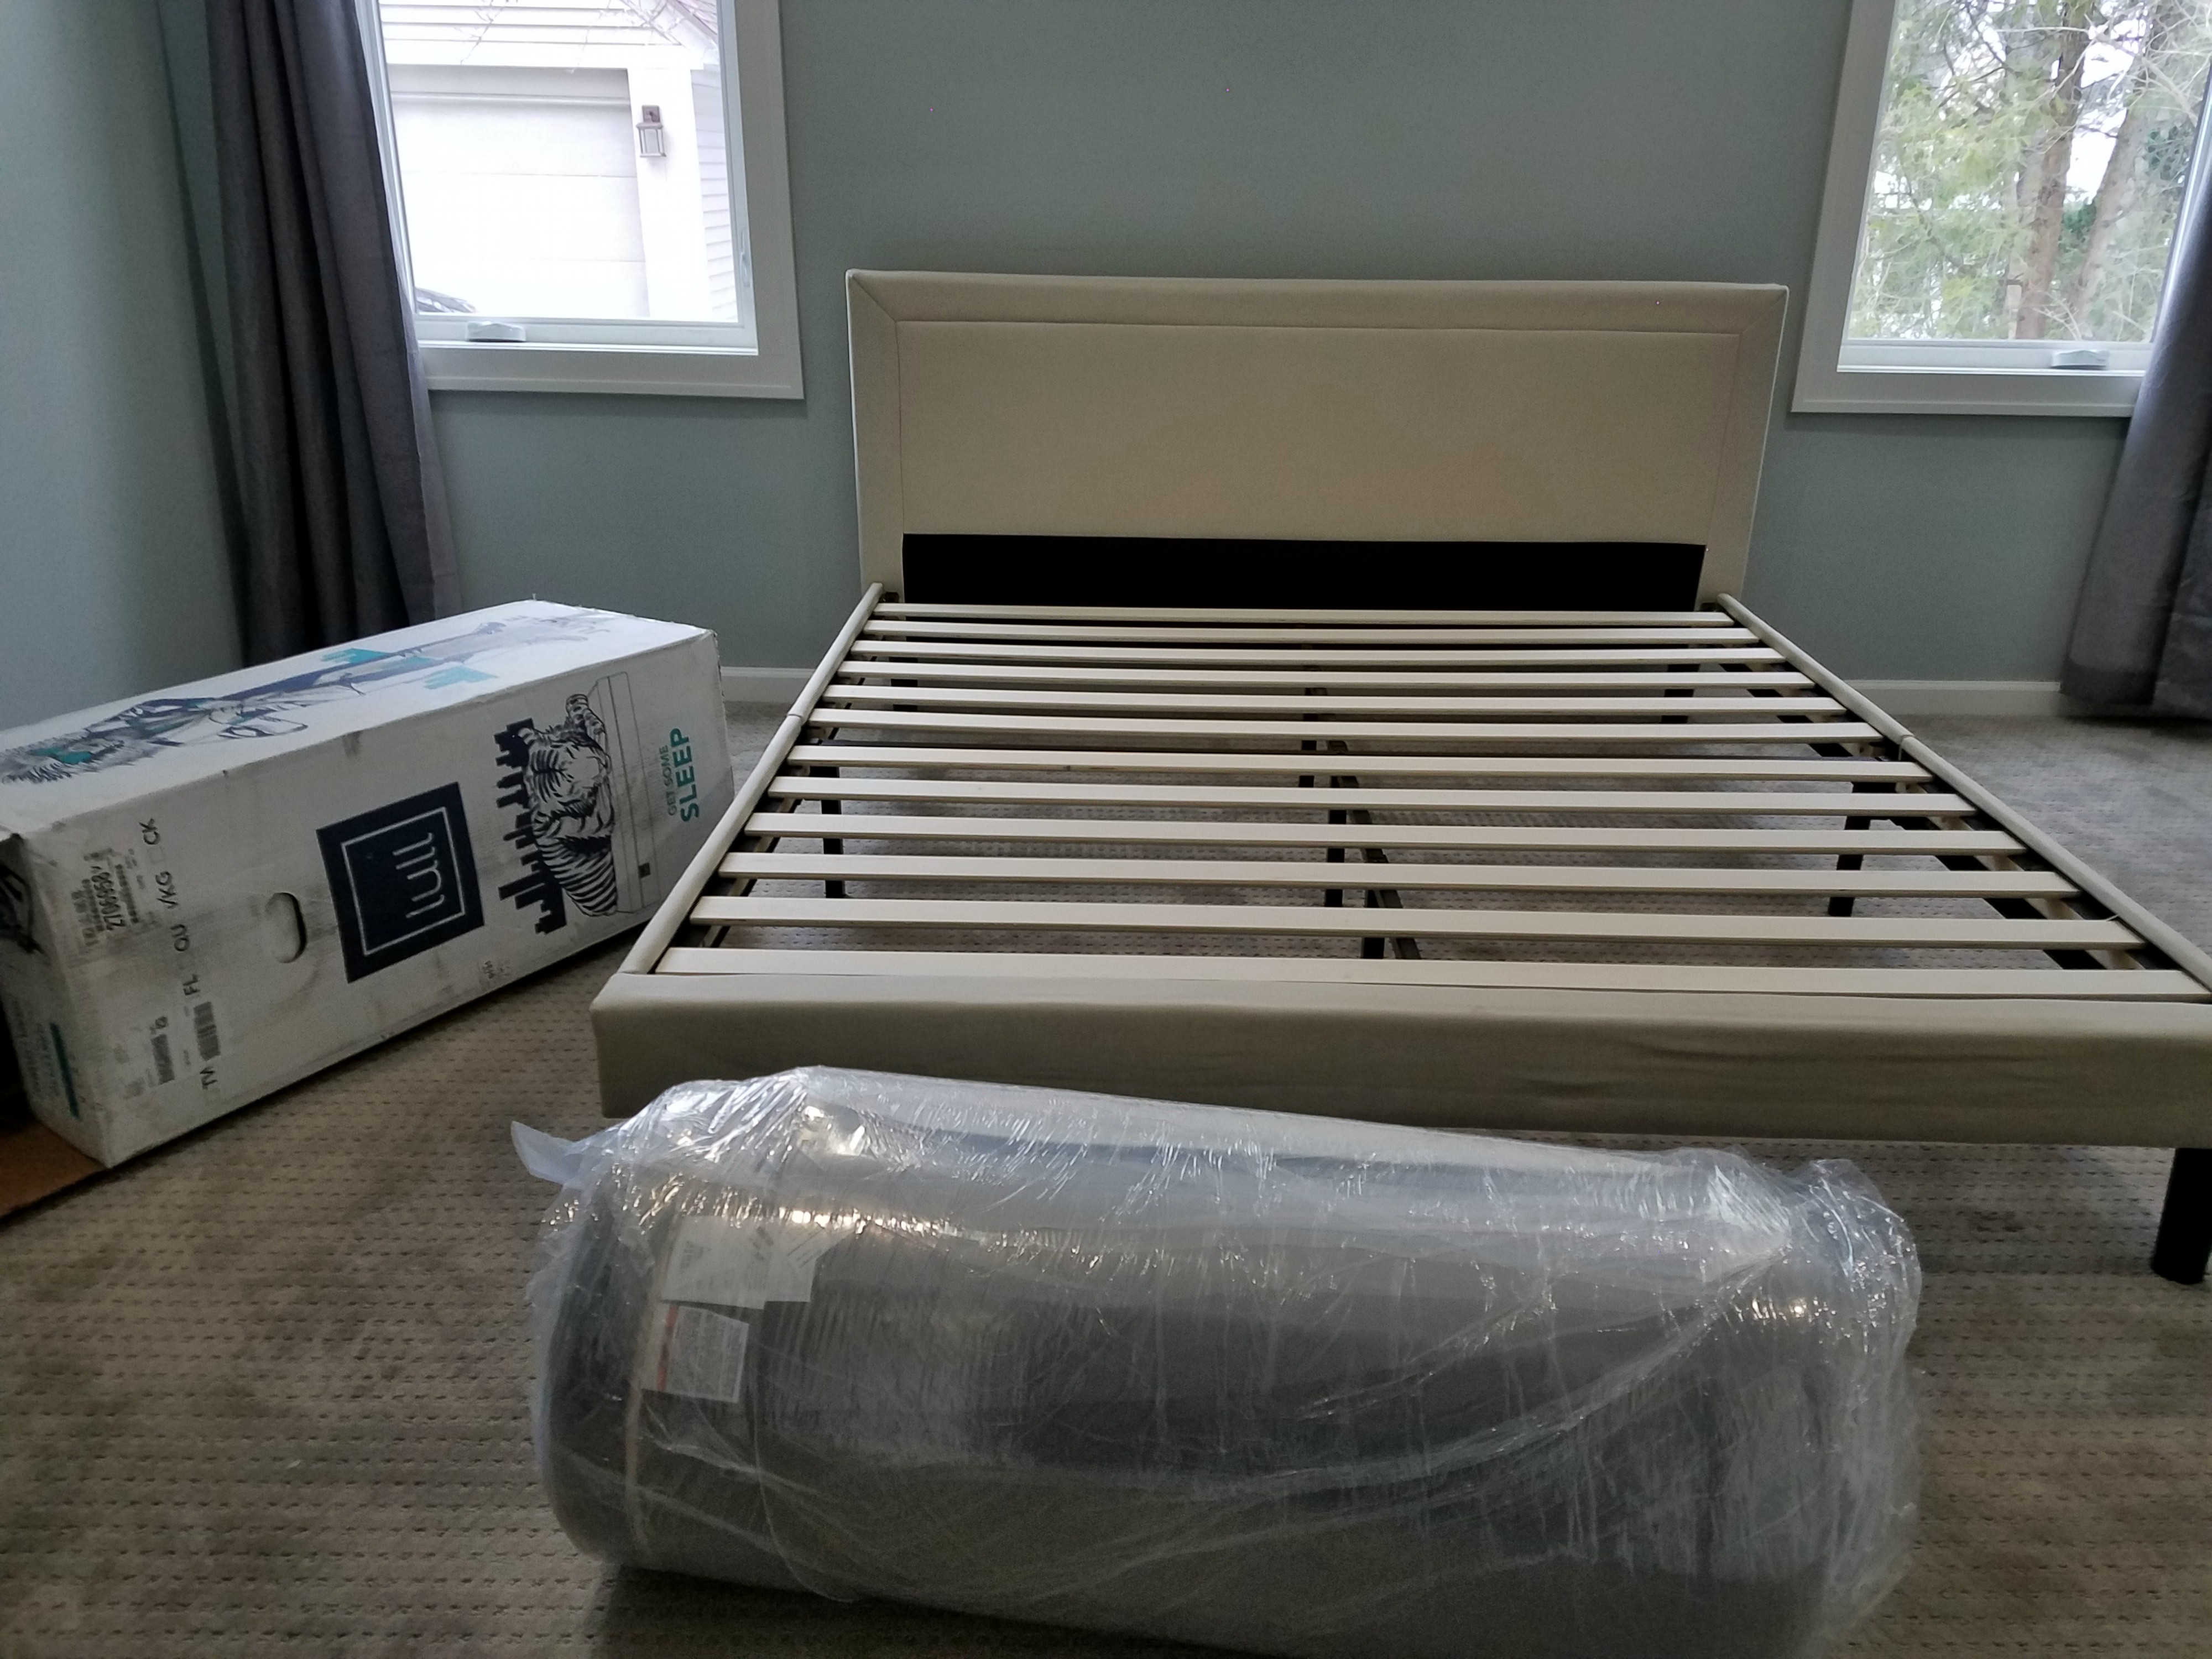 Lull Mattress Sleep Review Busted, Lull Wood Bed Frame Reviews